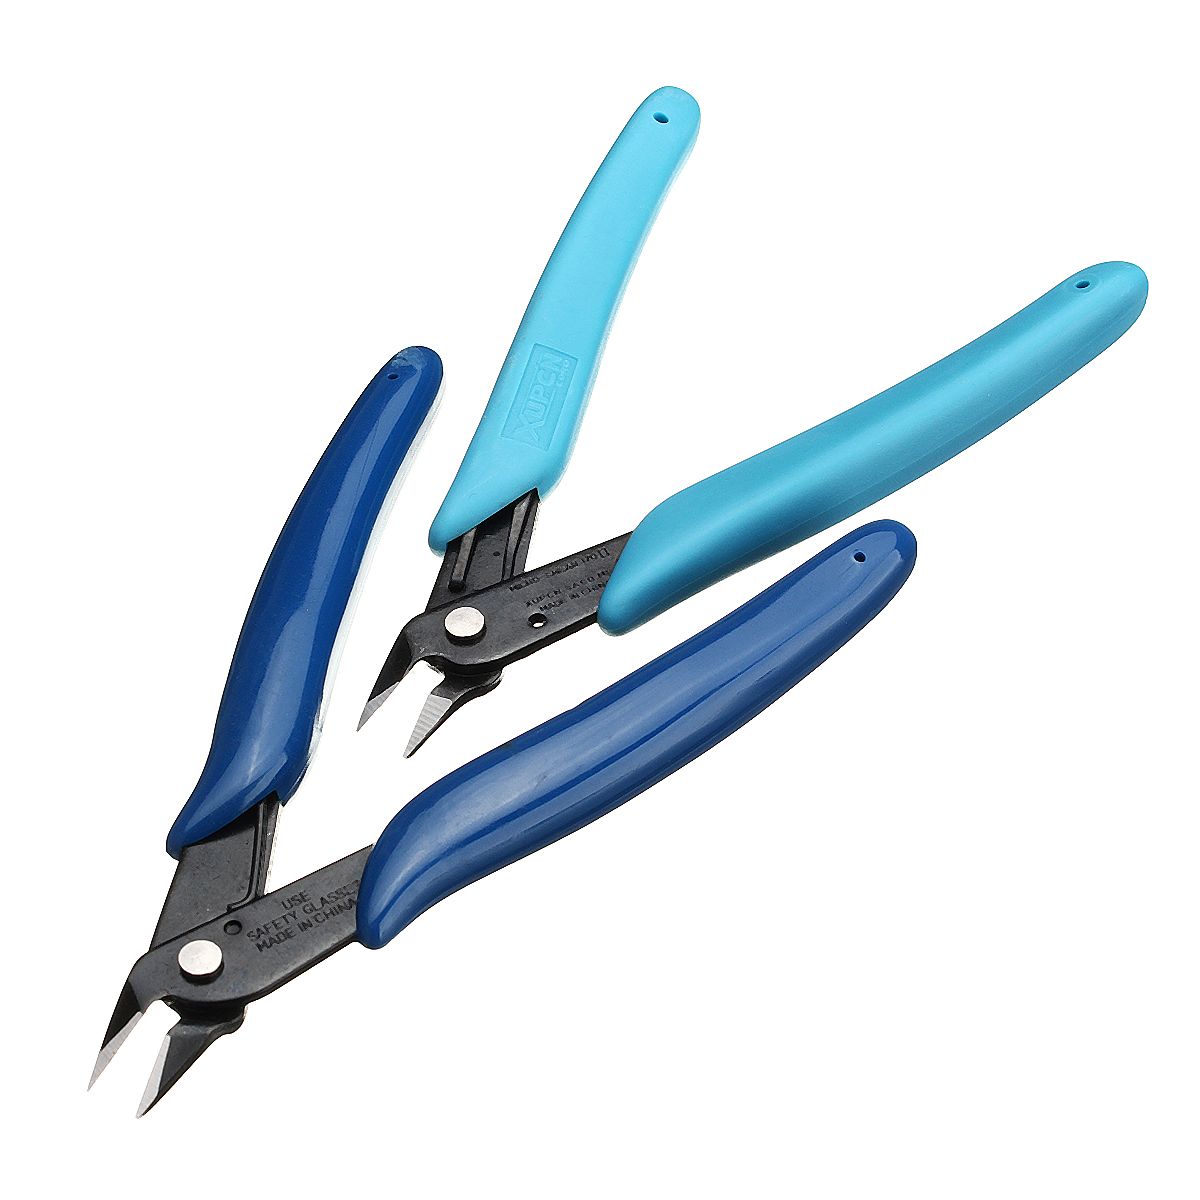 Pliers-Nipper-H-Practical-Electrical-Wire-Cable-Cutter-Cutting-Side-Snips-Flush-Pliers-Mini-Pliers-1371806